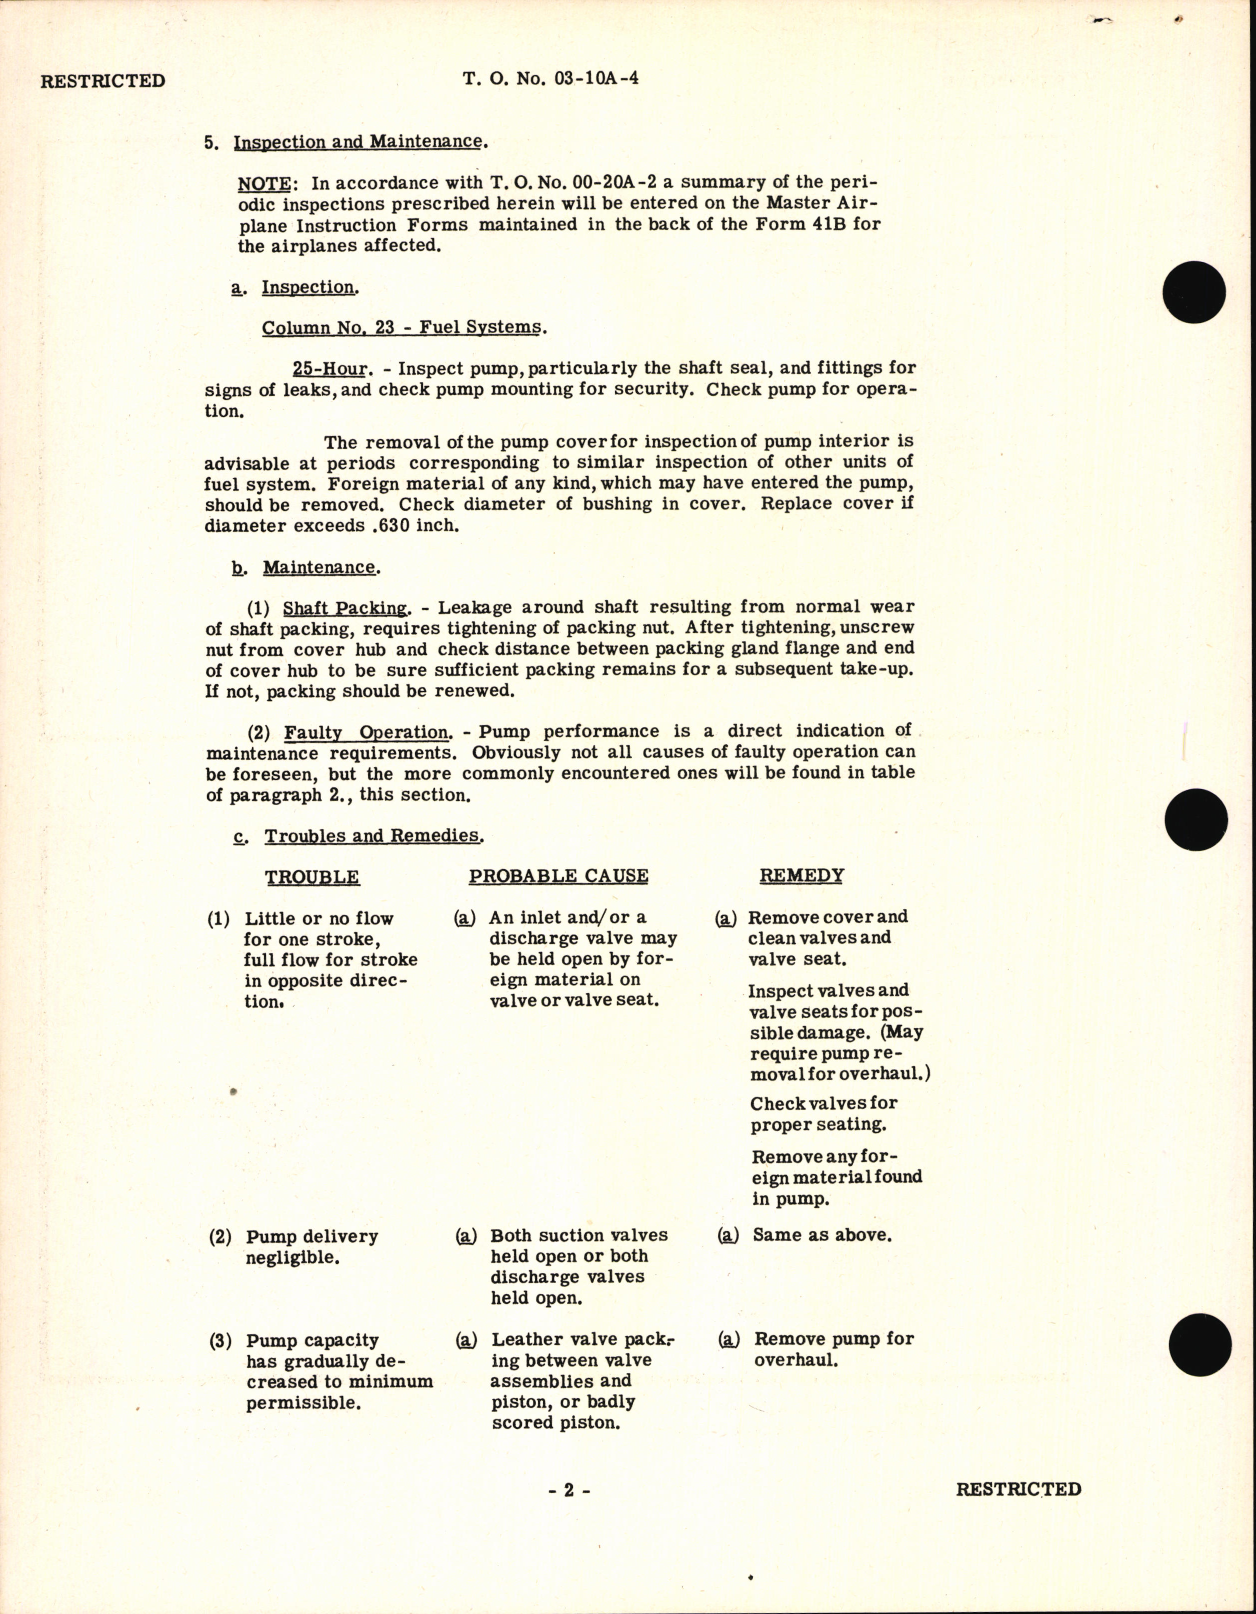 Sample page 6 from AirCorps Library document: Handbook of Instructions with Parts Catalog for Type D-3 Hand Refueling Pump